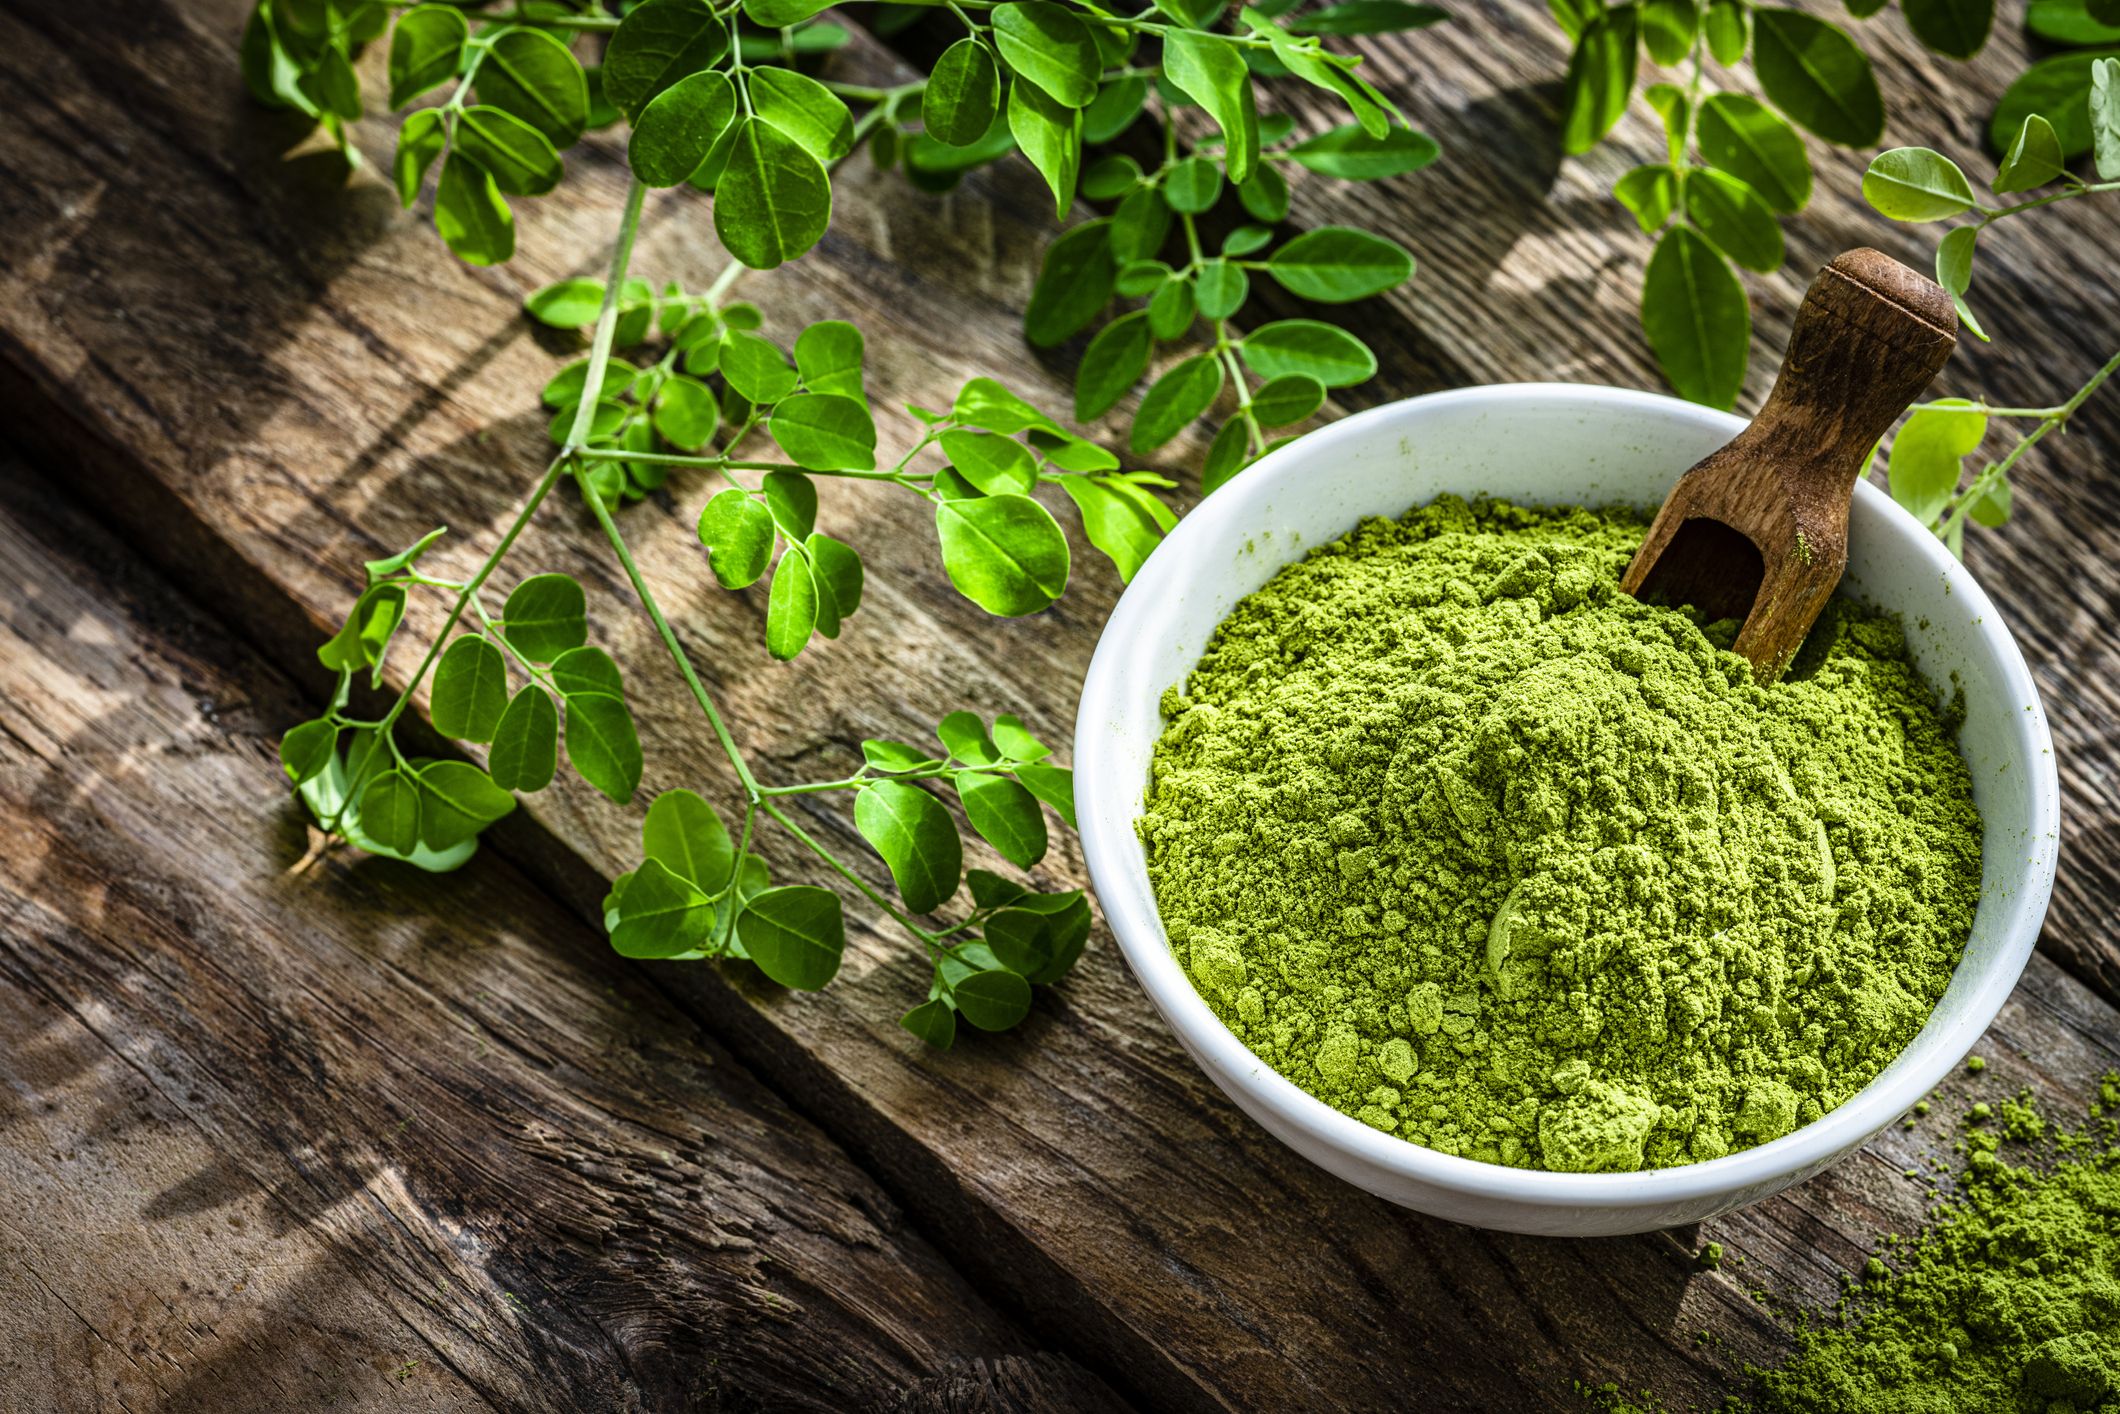 Moringa: Health Benefits, Side Effects & How to Use